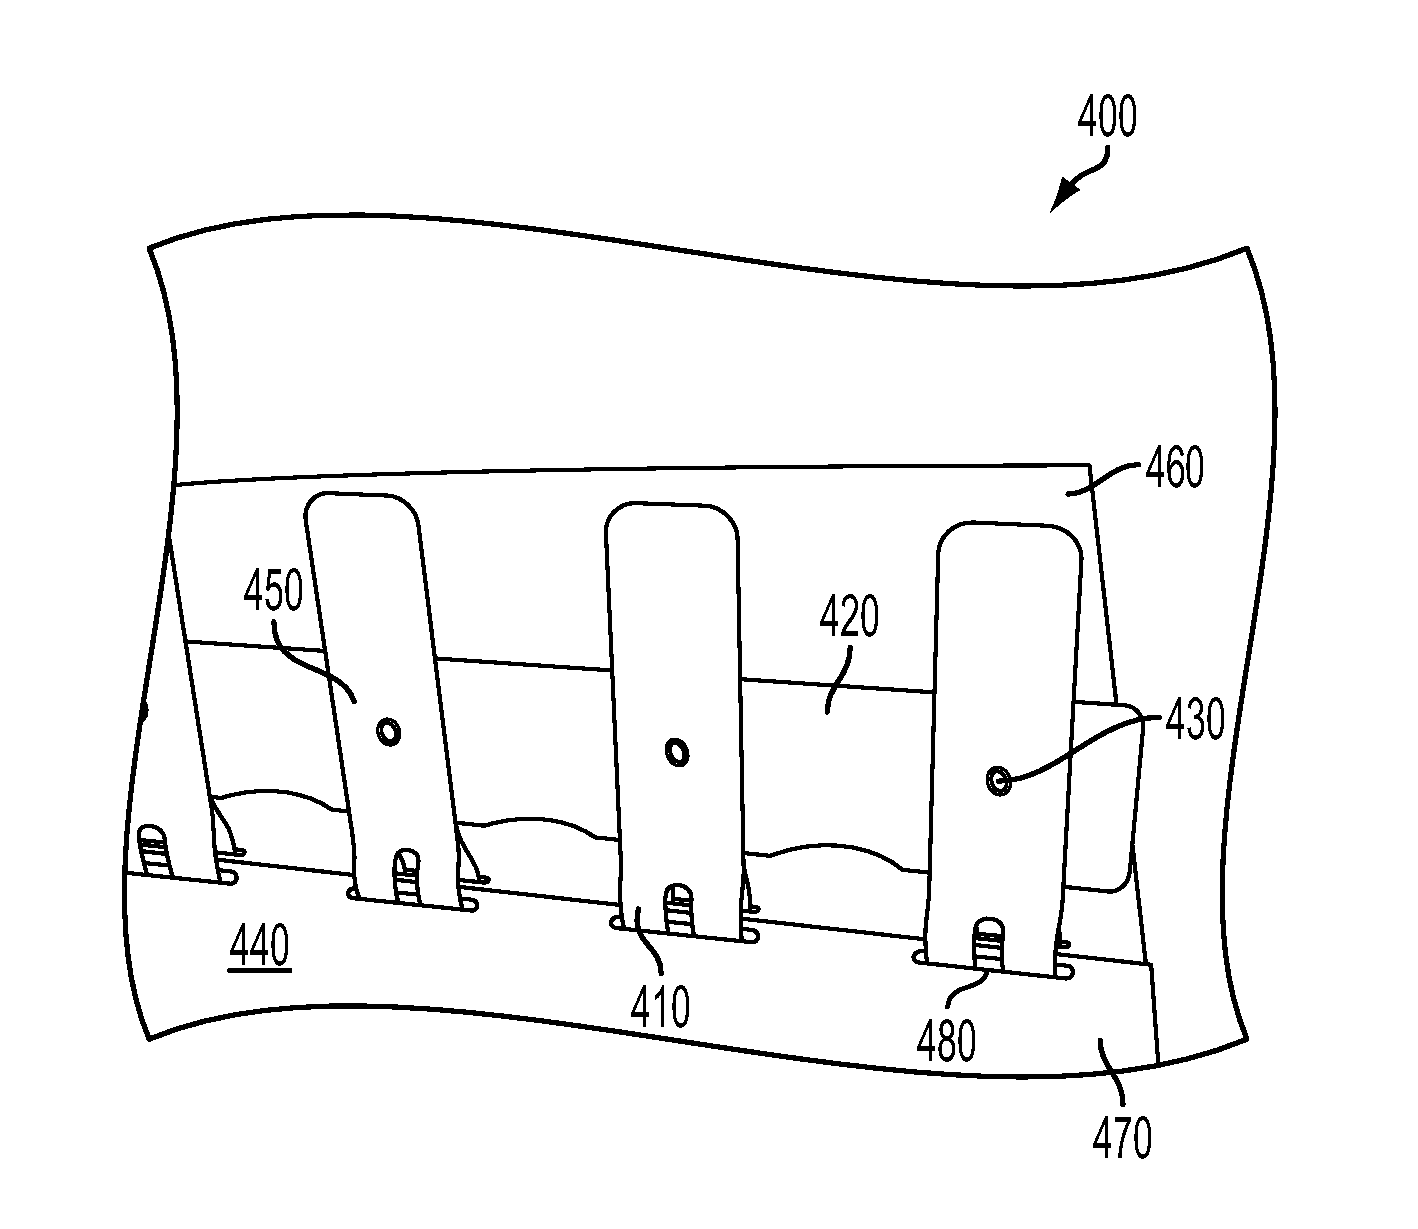 Method and system for mechanically binding a book spine